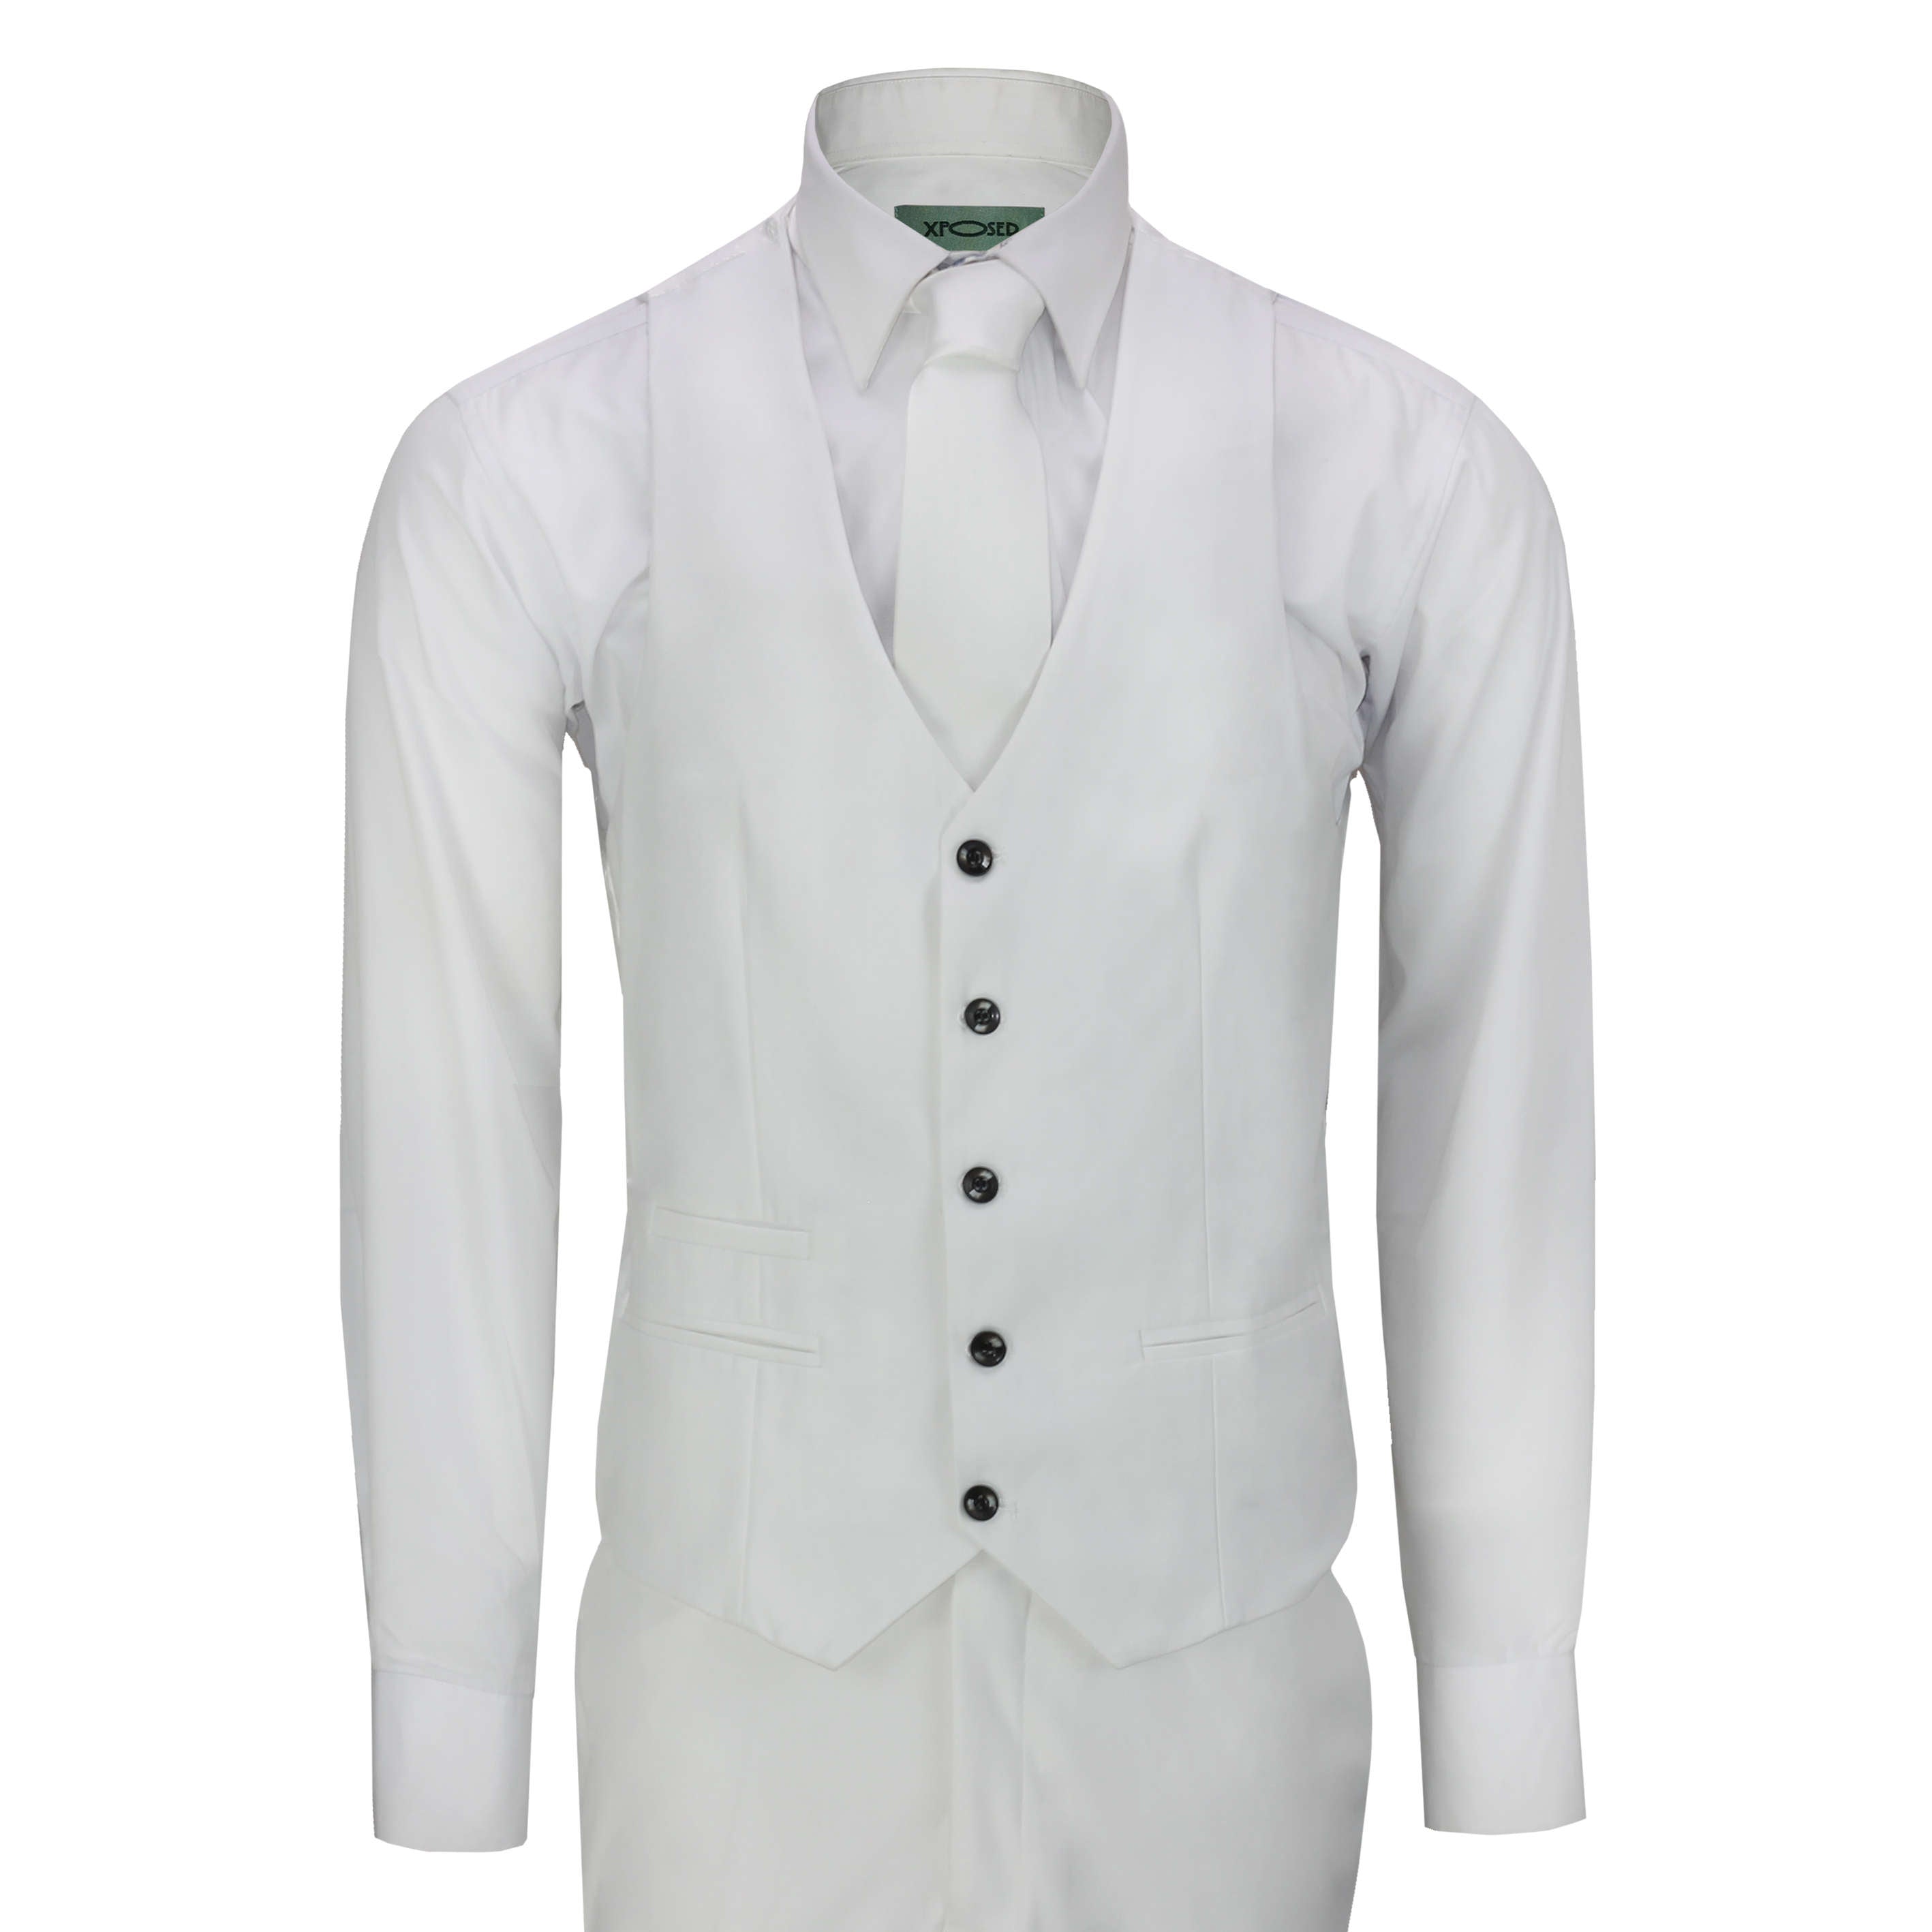 Mens 3 Piece Suit In White Smart Formal Wedding Party Retro Tailored Fit